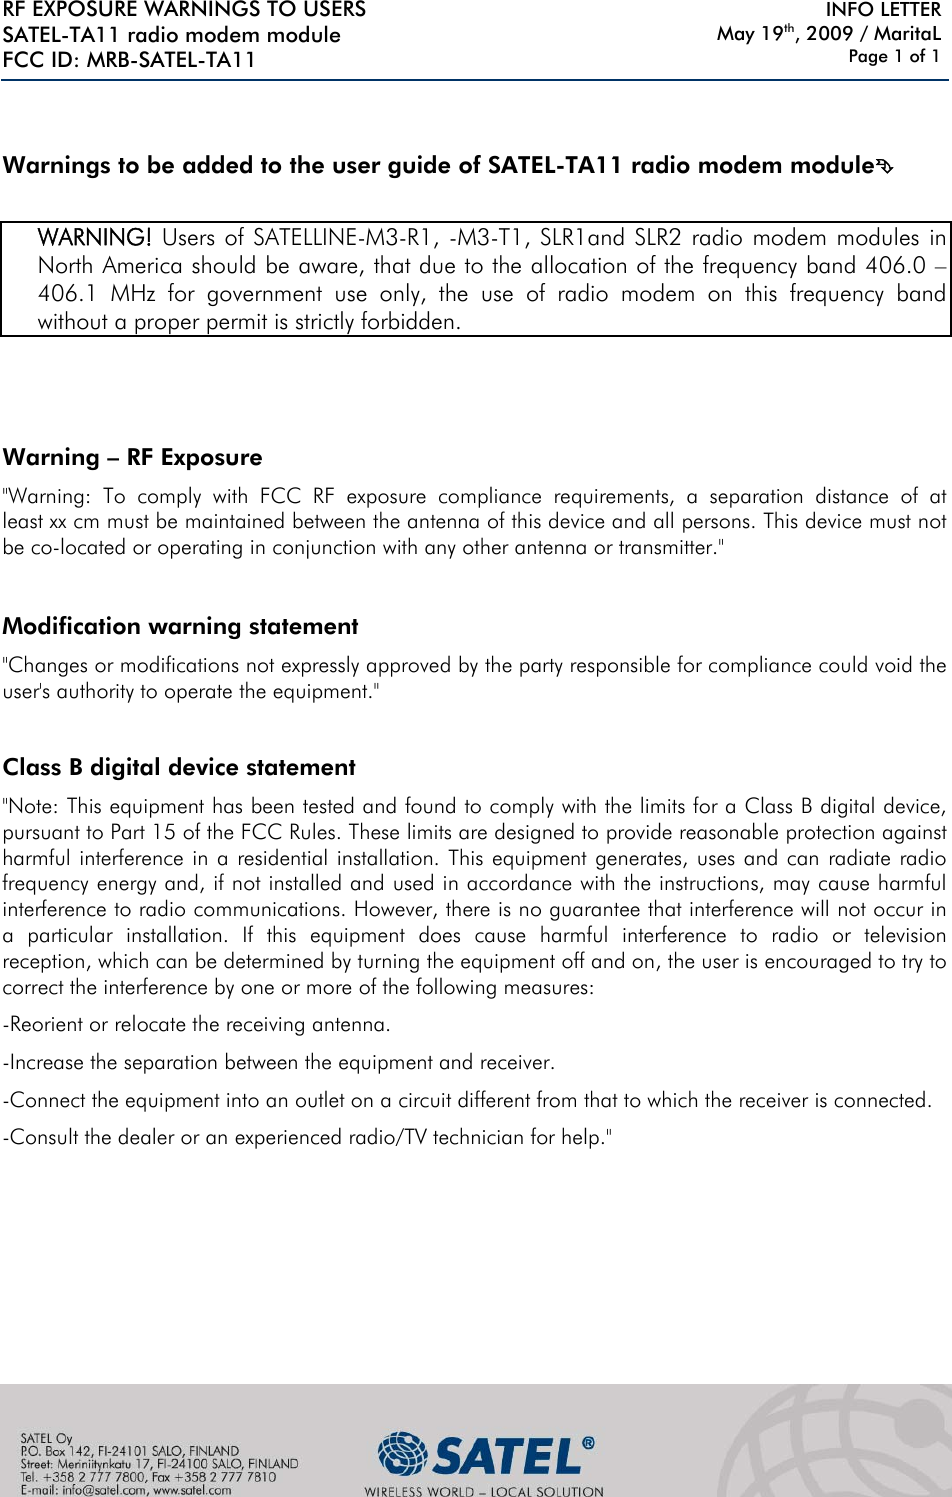 RF EXPOSURE WARNINGS TO USERS SATEL-TA11 radio modem module FCC ID: MRB-SATEL-TA11     INFO LETTER May 19th, 2009 / MaritaL Page 1 of 1    Warnings to be added to the user guide of SATEL-TA11 radio modem module°   WARNING! Users of SATELLINE-M3-R1, -M3-T1, SLR1and SLR2 radio modem modules in North America should be aware, that due to the allocation of the frequency band 406.0 – 406.1 MHz for government use only, the use of radio modem on this frequency band without a proper permit is strictly forbidden.      Warning – RF Exposure  &quot;Warning: To comply with FCC RF exposure compliance requirements, a separation distance of at least xx cm must be maintained between the antenna of this device and all persons. This device must not be co-located or operating in conjunction with any other antenna or transmitter.&quot;  Modification warning statement &quot;Changes or modifications not expressly approved by the party responsible for compliance could void the user&apos;s authority to operate the equipment.&quot;  Class B digital device statement &quot;Note: This equipment has been tested and found to comply with the limits for a Class B digital device, pursuant to Part 15 of the FCC Rules. These limits are designed to provide reasonable protection against harmful interference in a residential installation. This equipment generates, uses and can radiate radio frequency energy and, if not installed and used in accordance with the instructions, may cause harmful interference to radio communications. However, there is no guarantee that interference will not occur in a particular installation. If this equipment does cause harmful interference to radio or television reception, which can be determined by turning the equipment off and on, the user is encouraged to try to correct the interference by one or more of the following measures: -Reorient or relocate the receiving antenna. -Increase the separation between the equipment and receiver. -Connect the equipment into an outlet on a circuit different from that to which the receiver is connected. -Consult the dealer or an experienced radio/TV technician for help.&quot;        